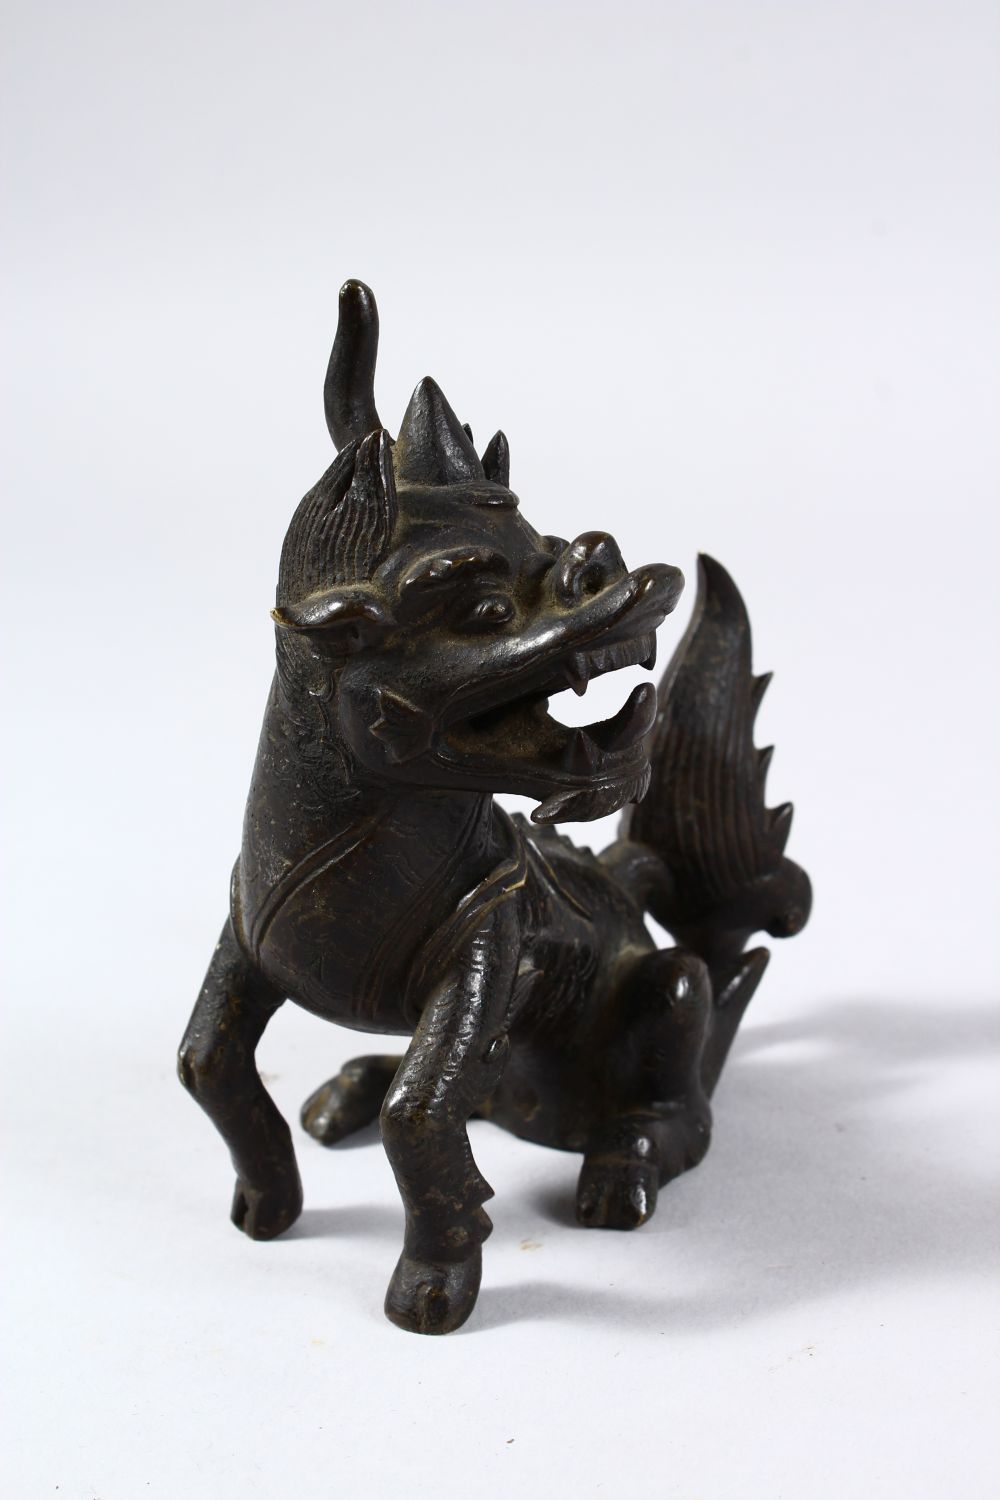 AN 18TH / 19TH CENTURY OR EARLIER CHINESE BRONZE FIGURE OF KYLIN, in a seated position with its - Image 4 of 6